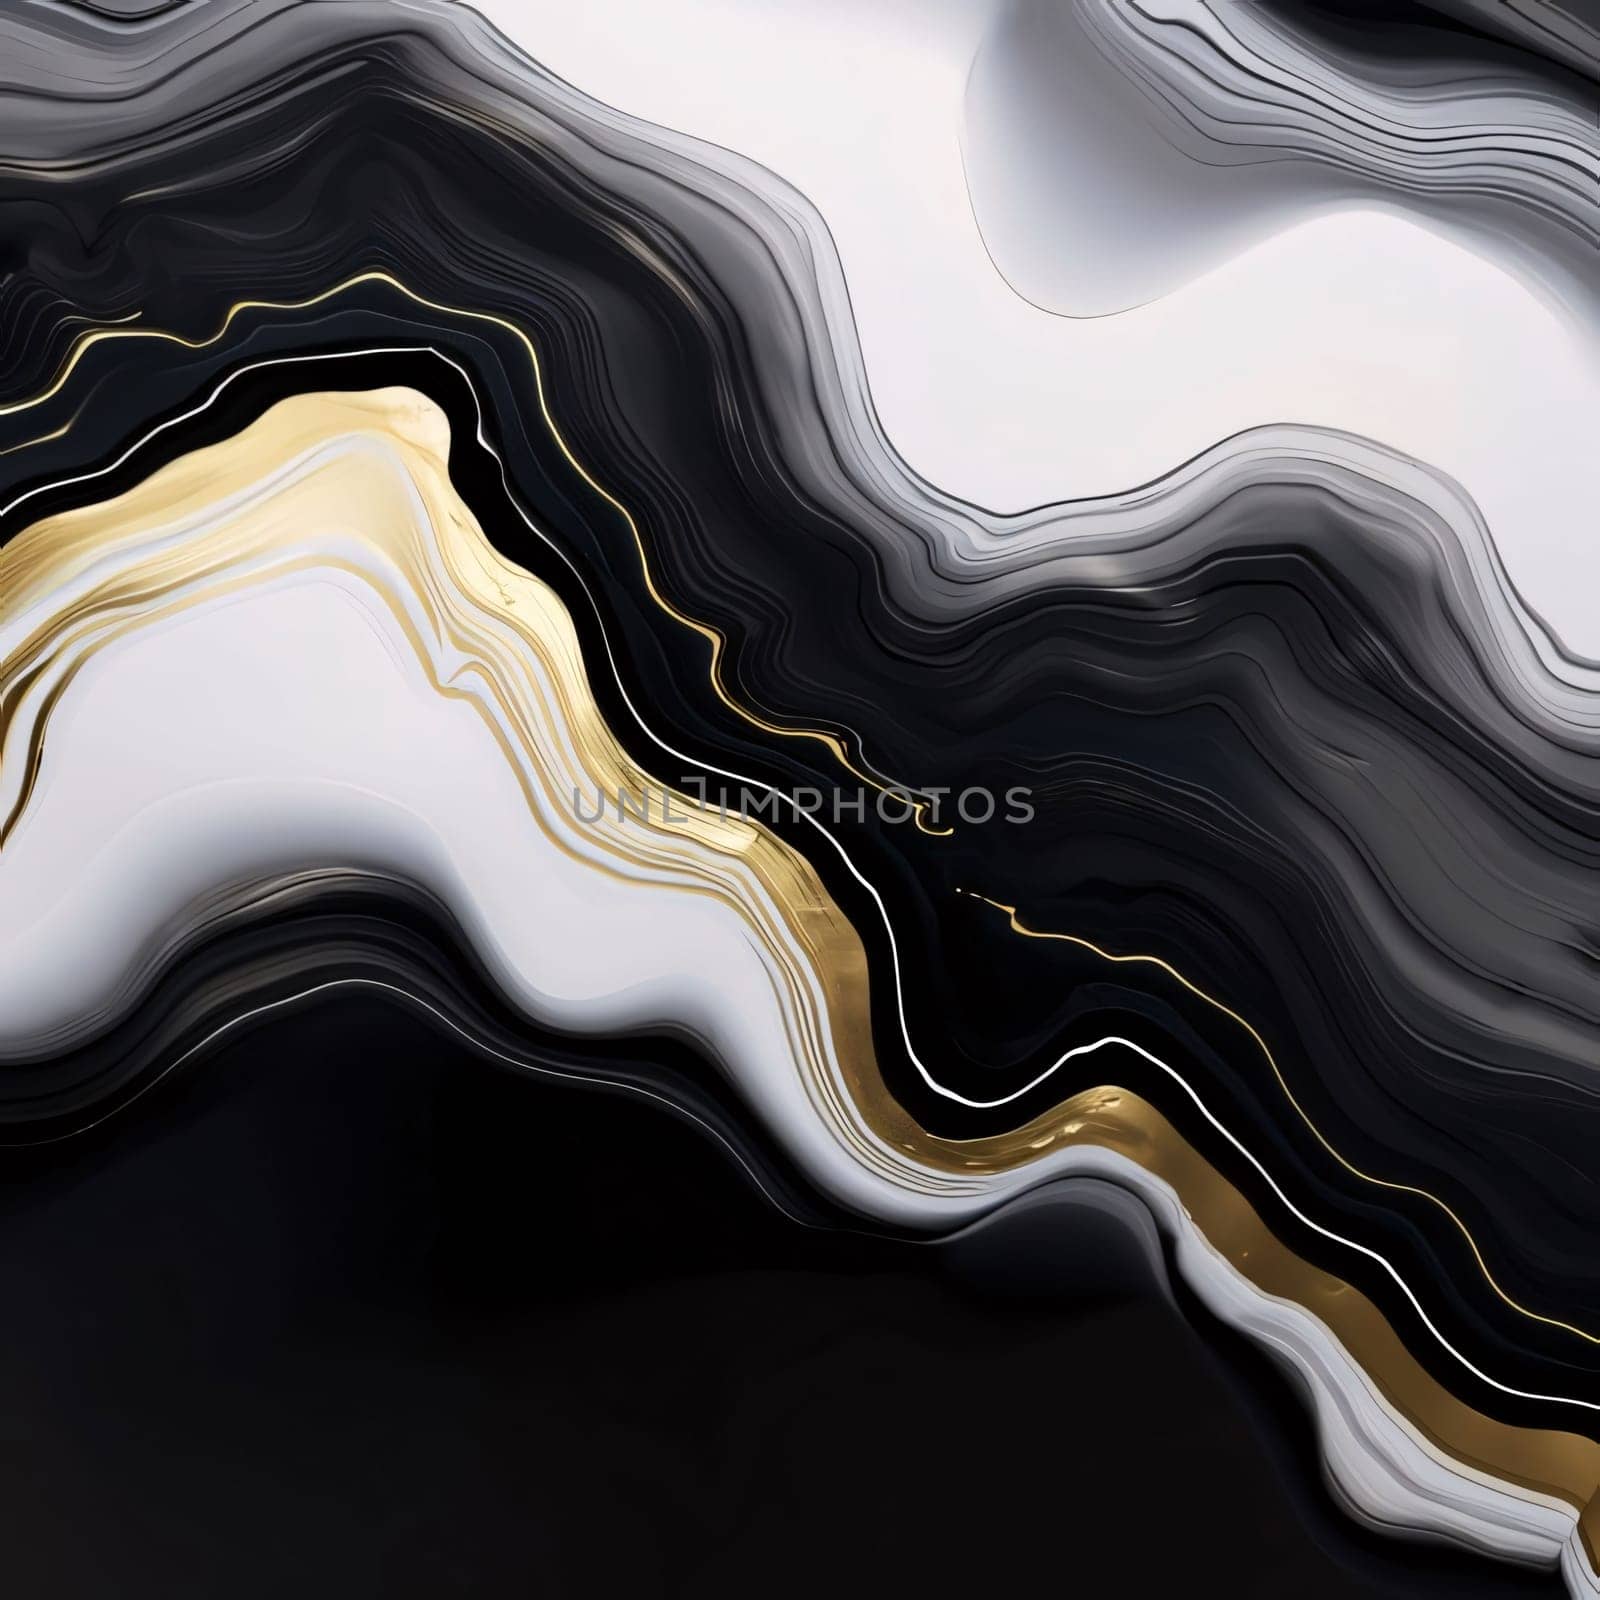 Abstract background design: Marble patterned background. Marbling texture design with gold, black and white colors. Marble patterned texture background.